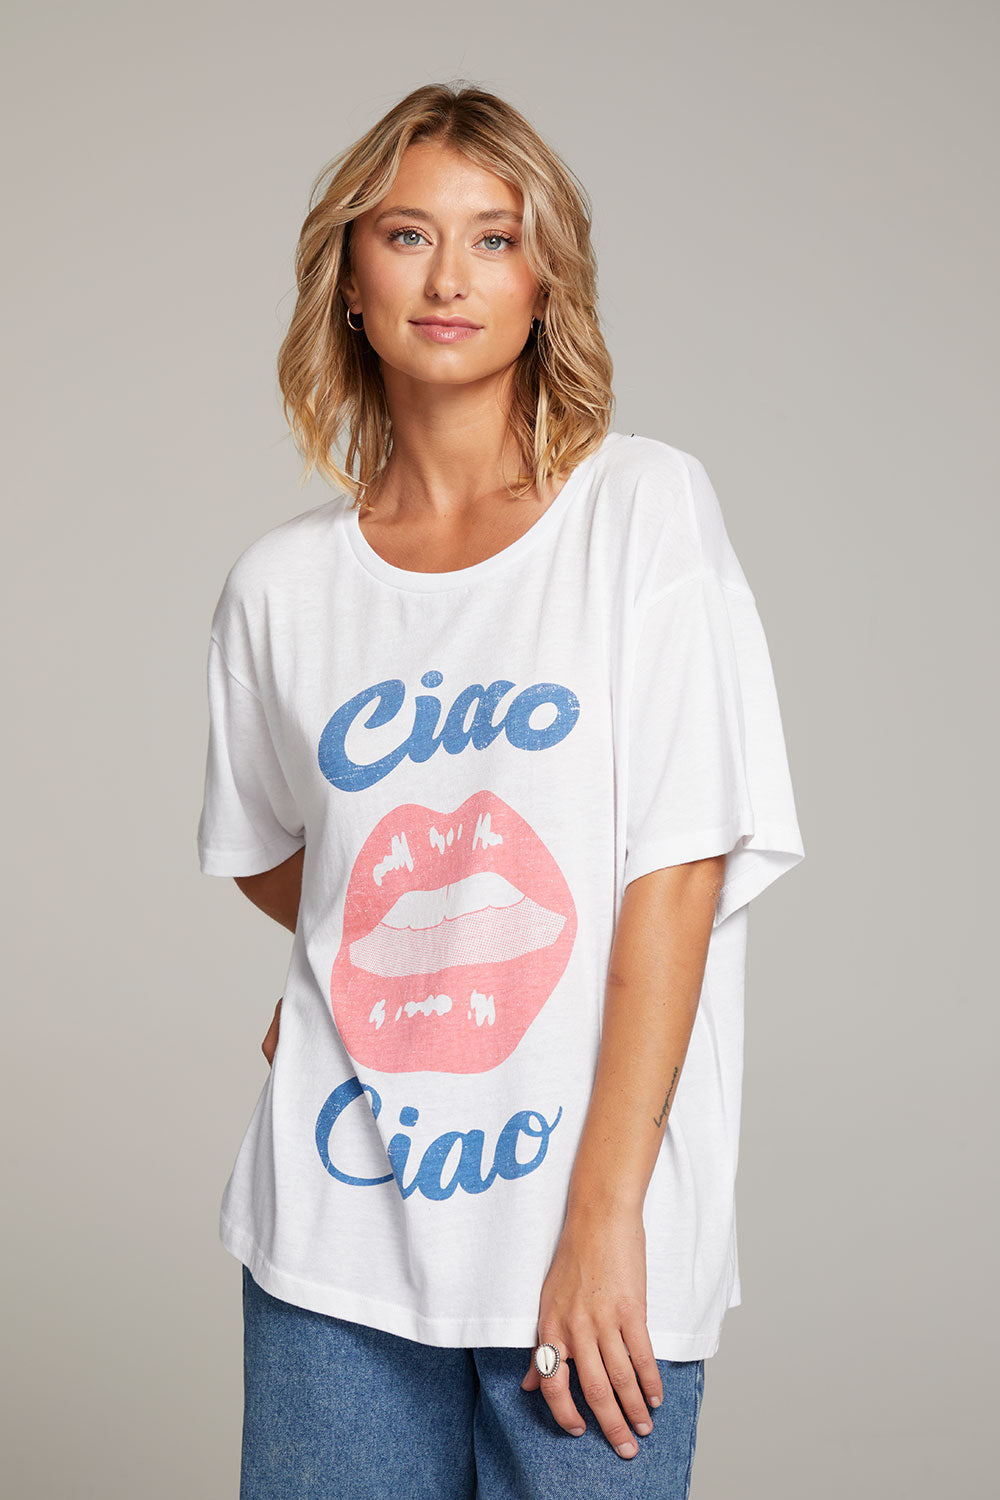 Ciao Ciao Lips Tee WOMENS chaserbrand